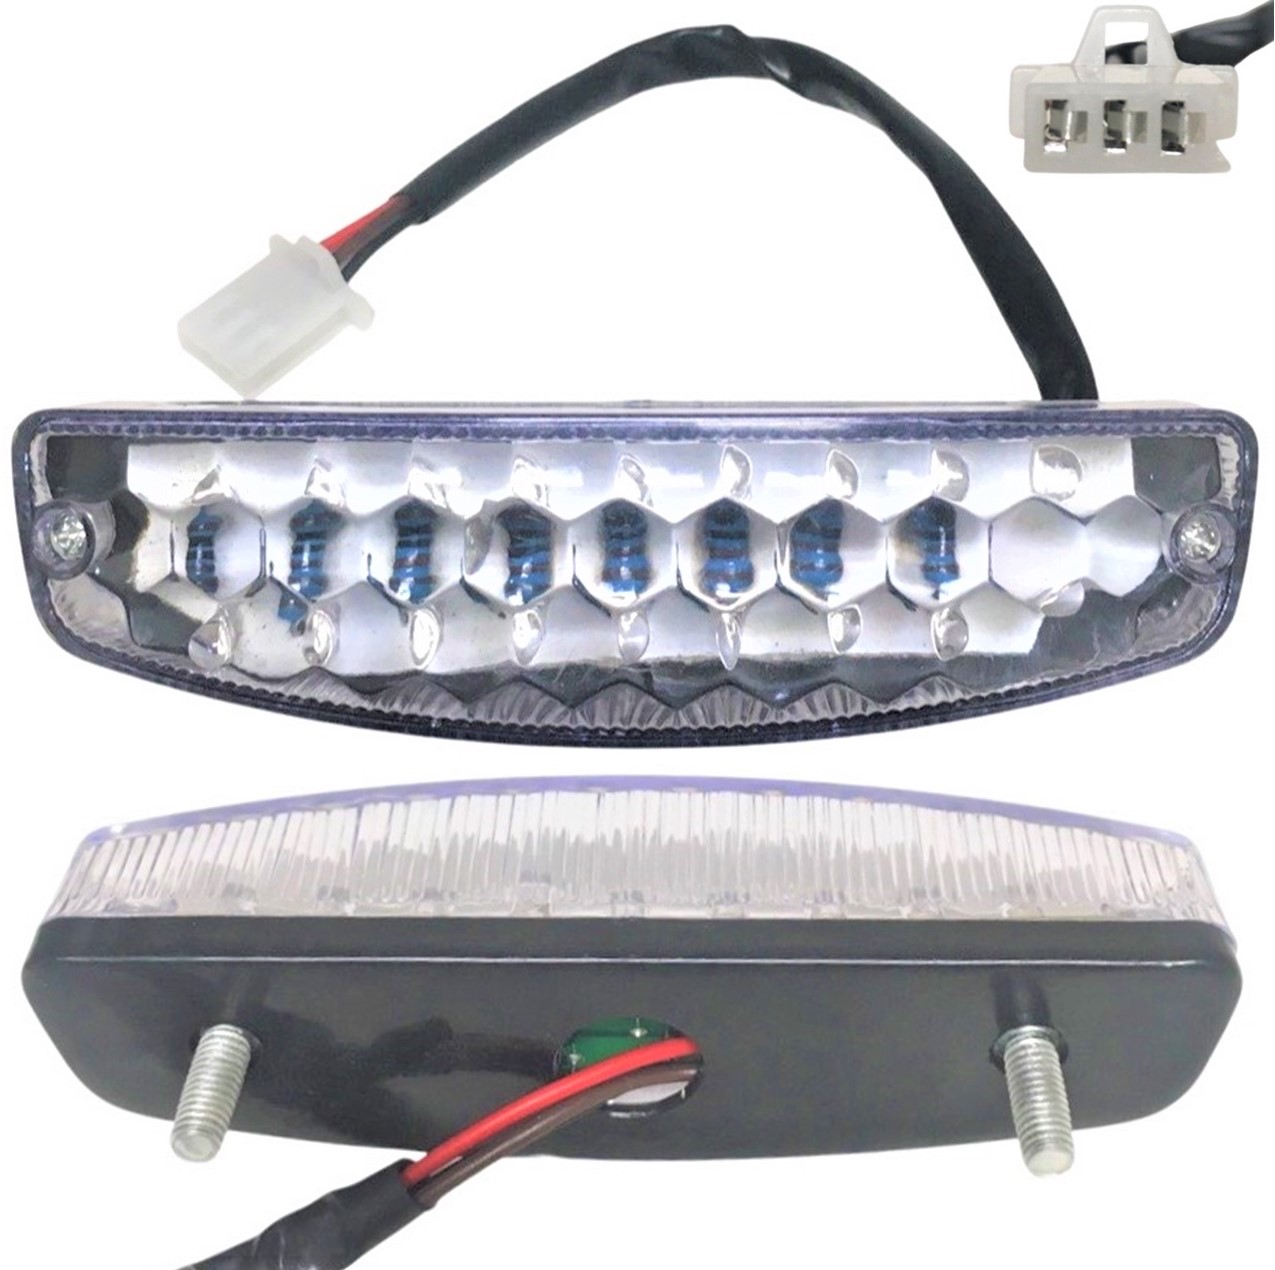 Rear Tail Light Fits Many ATV's, DirtBikes, and GoKarts W=5 H=1.5 3Pins in a 3 Pin Male Jack